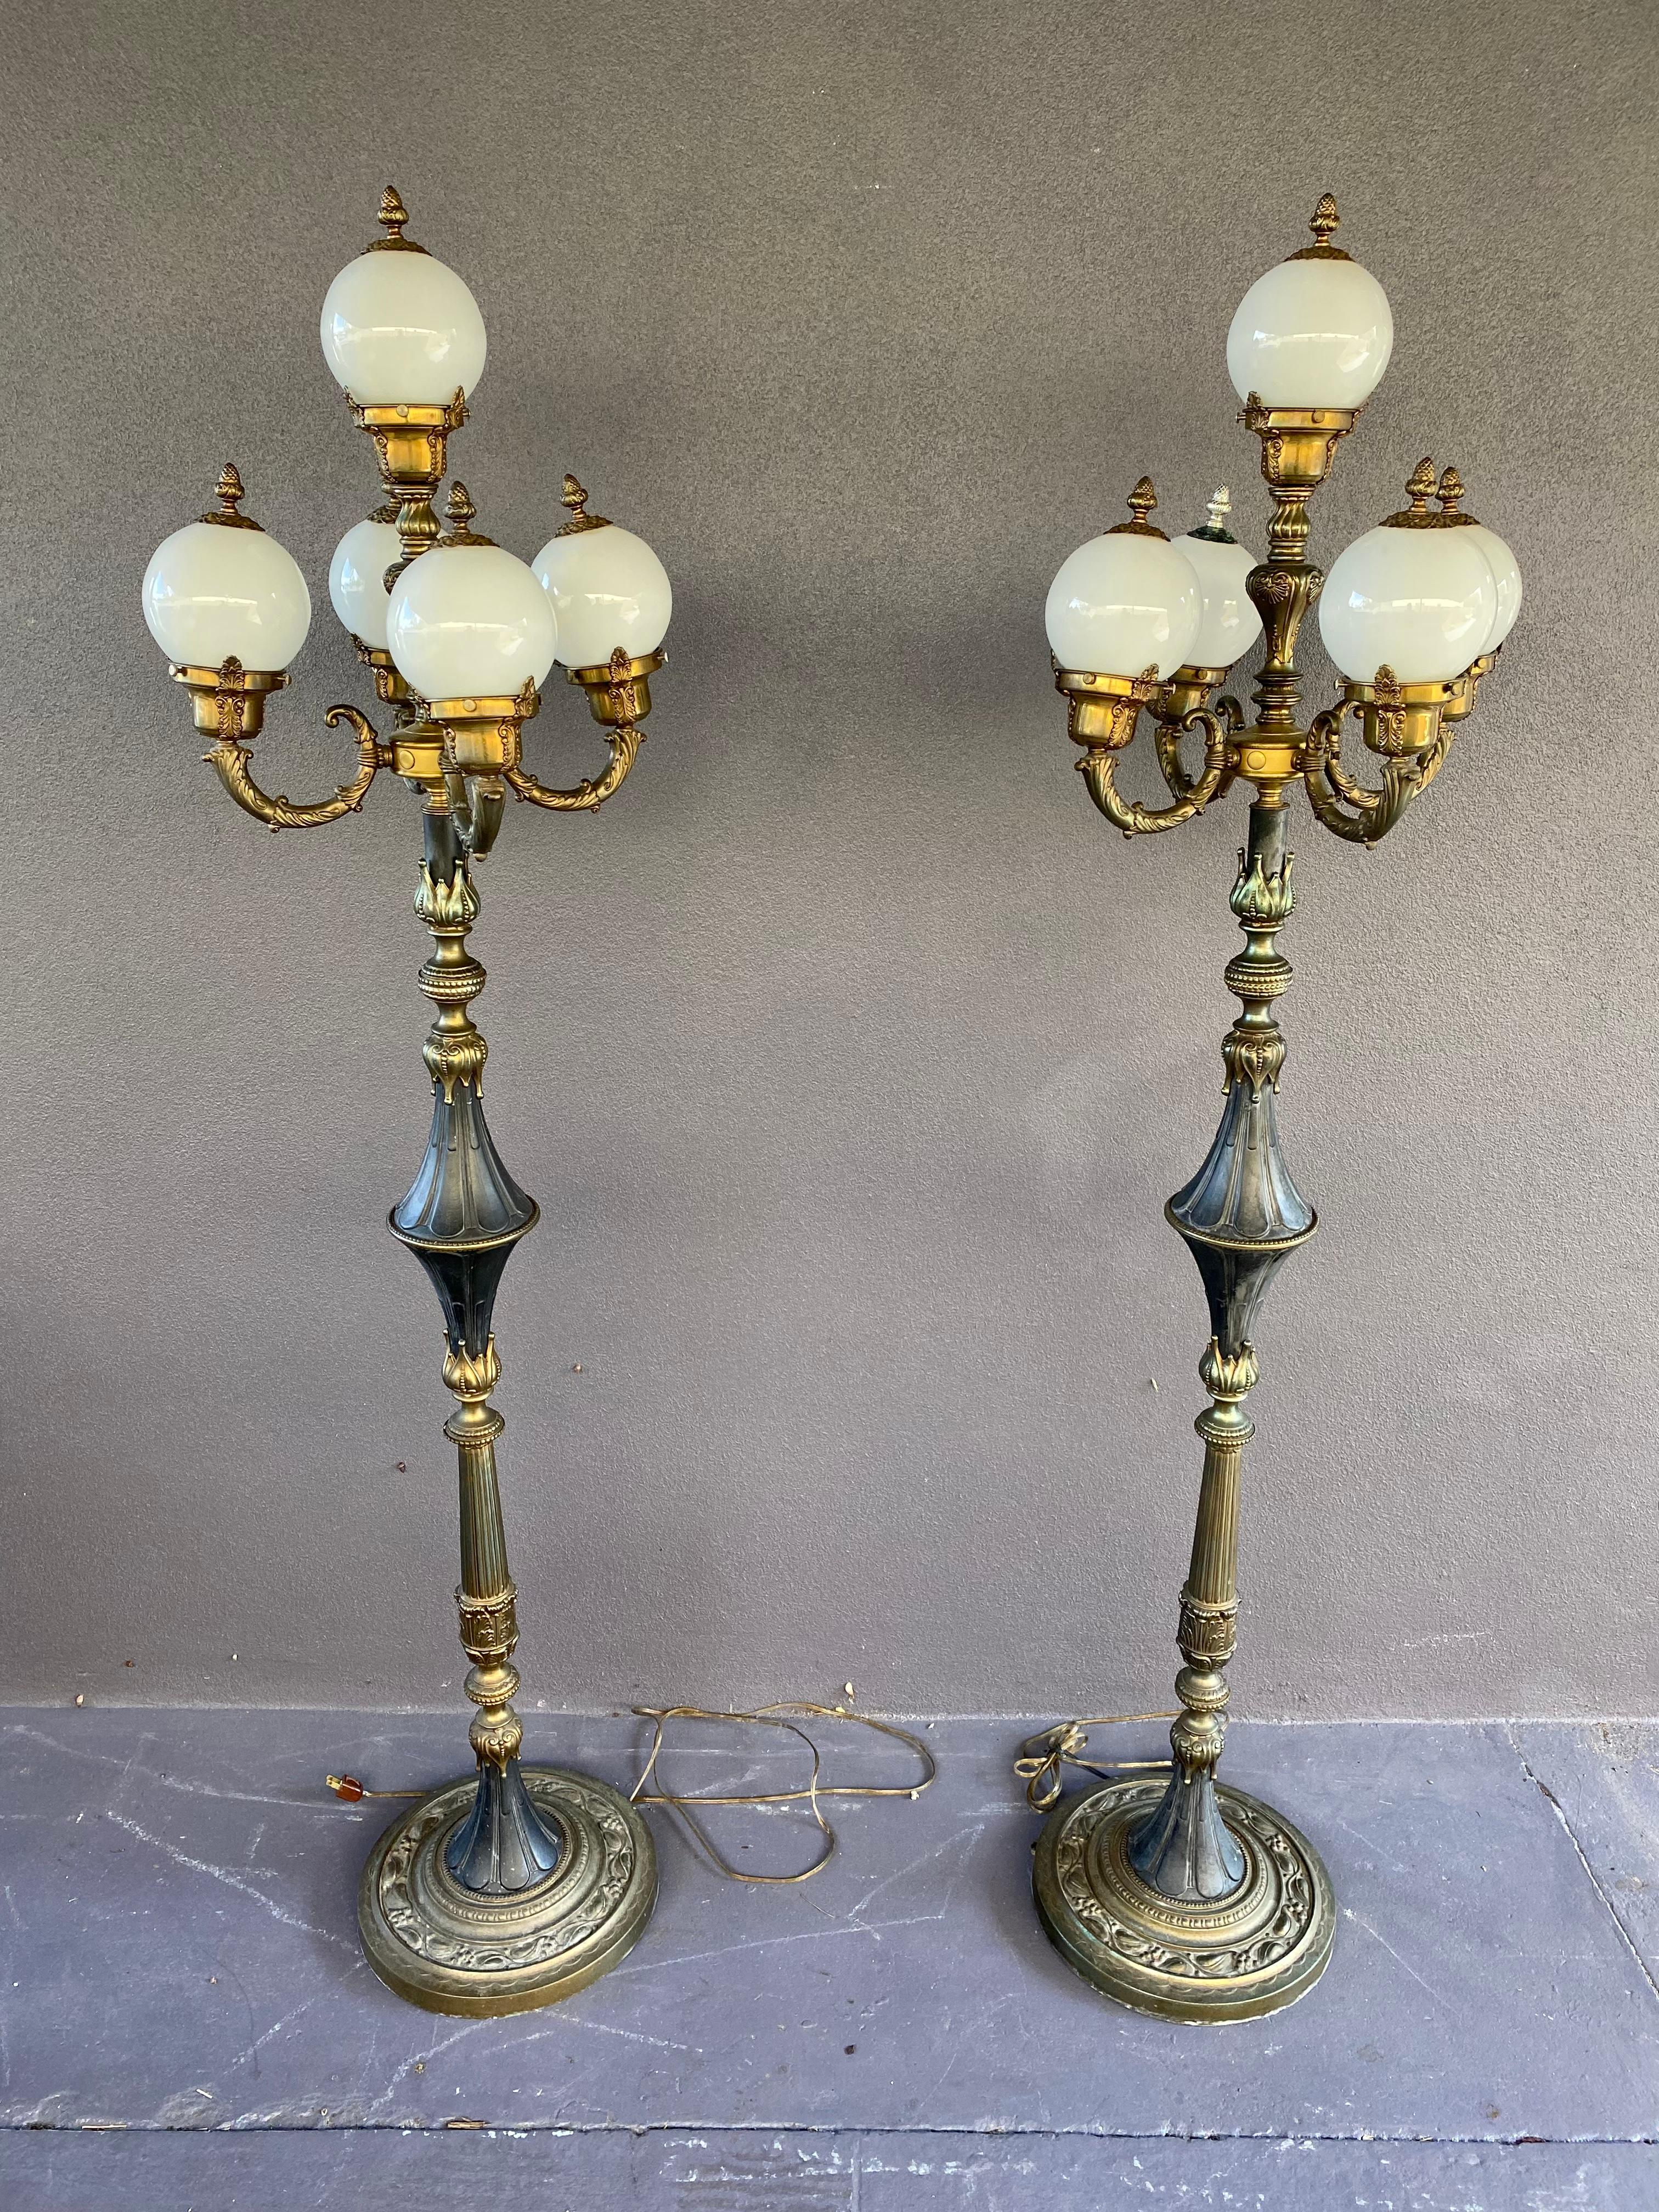 Rococo Revival Gilt Bronze Five Arms Glass Globes Floor Lamps, Set of 2 For Sale